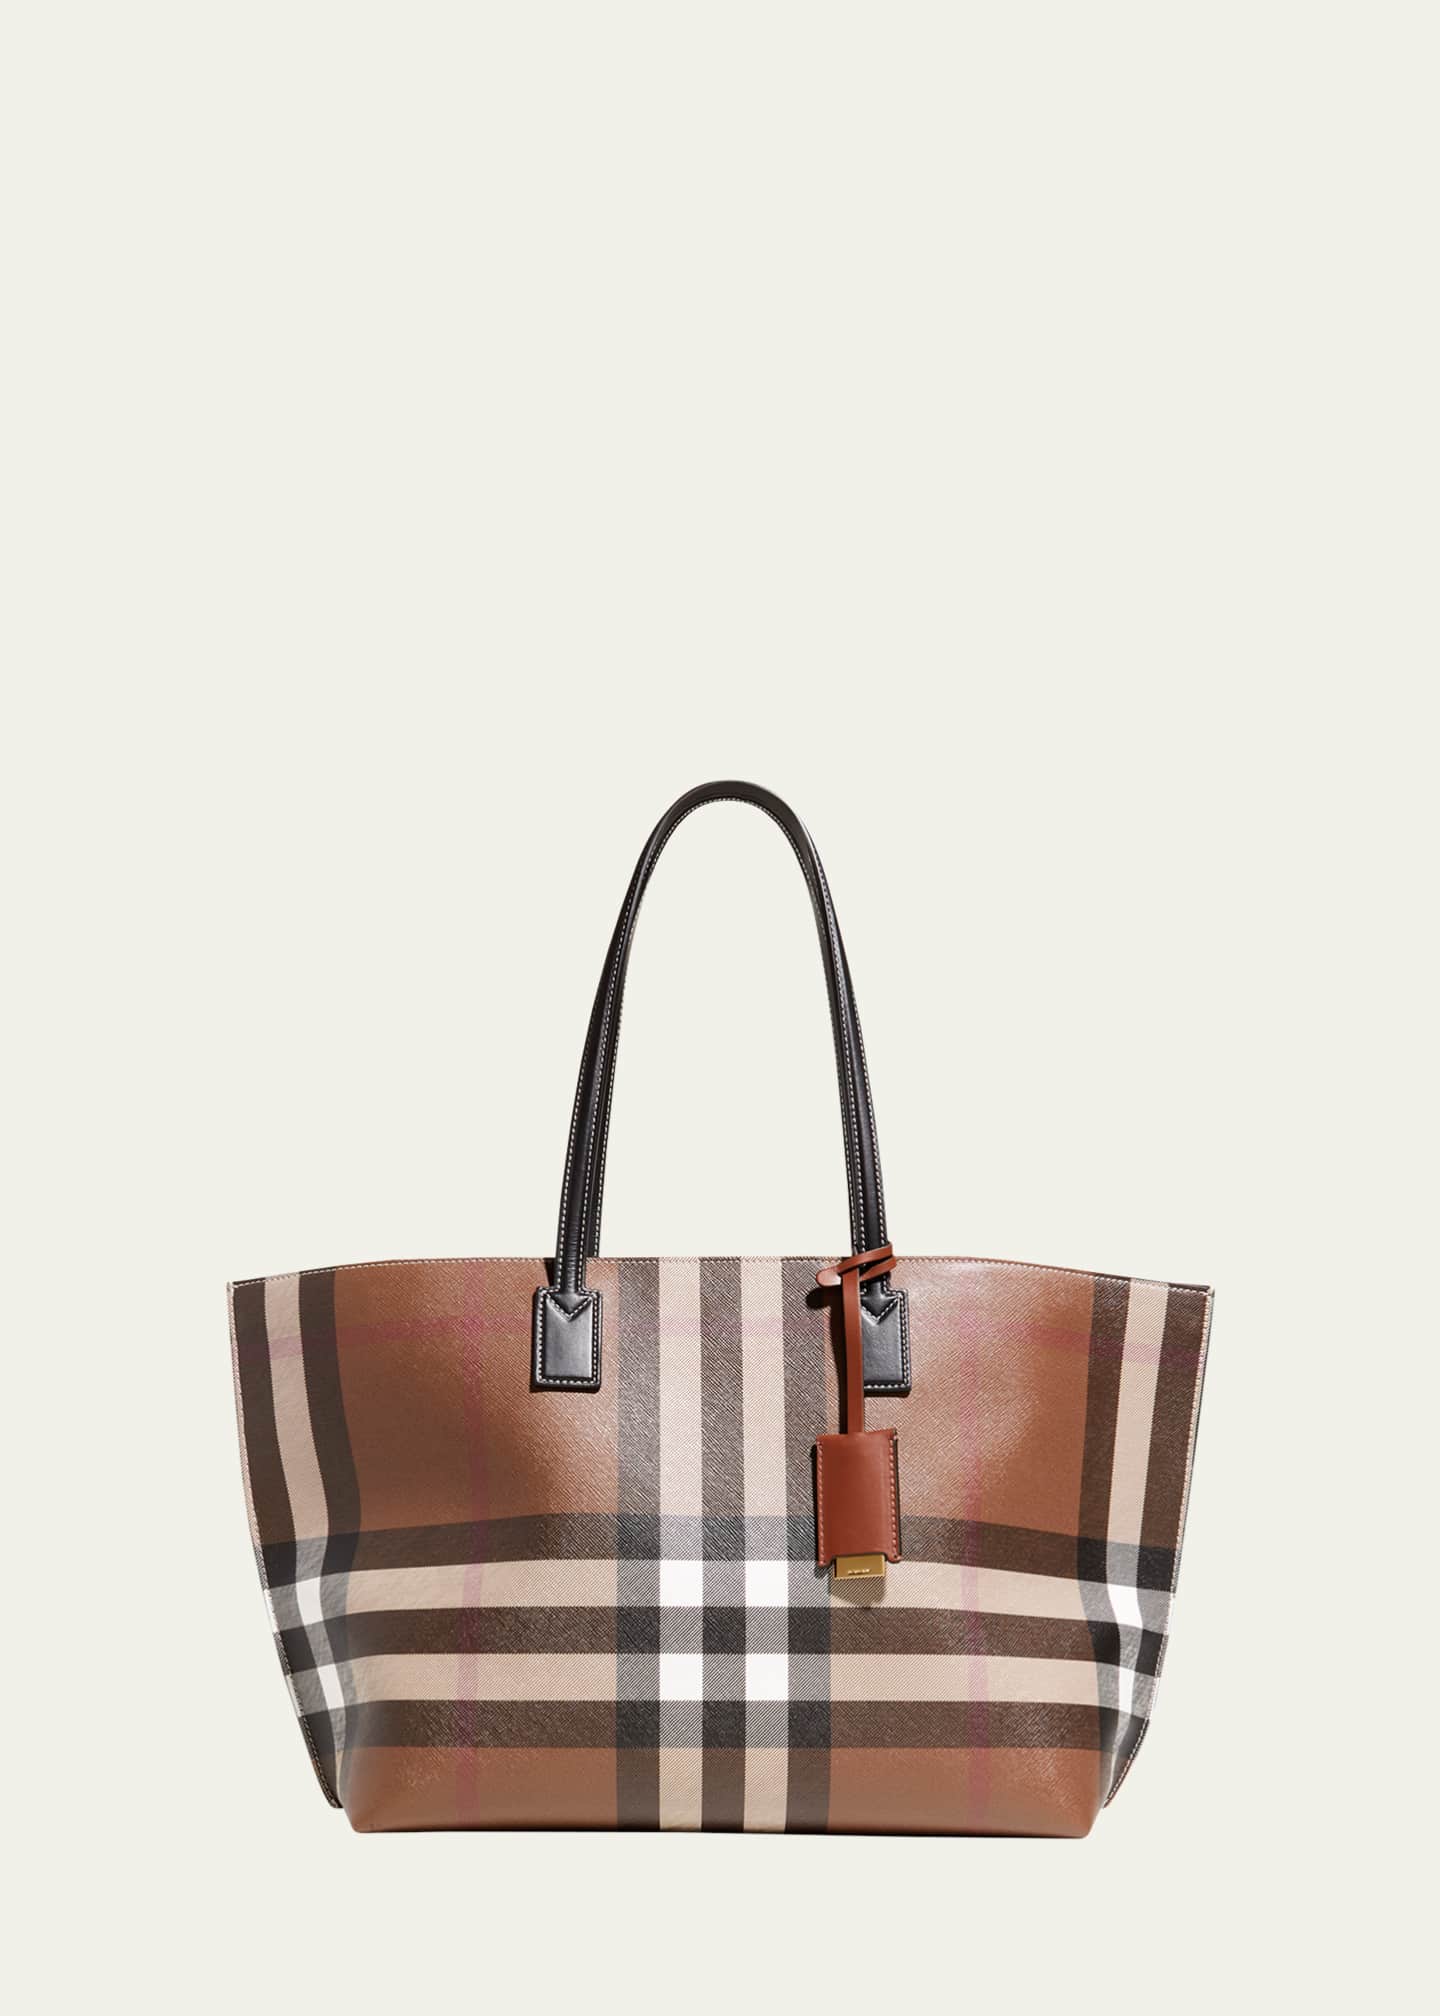 7 Most Popular and Classic Burberry Handbags and Purses